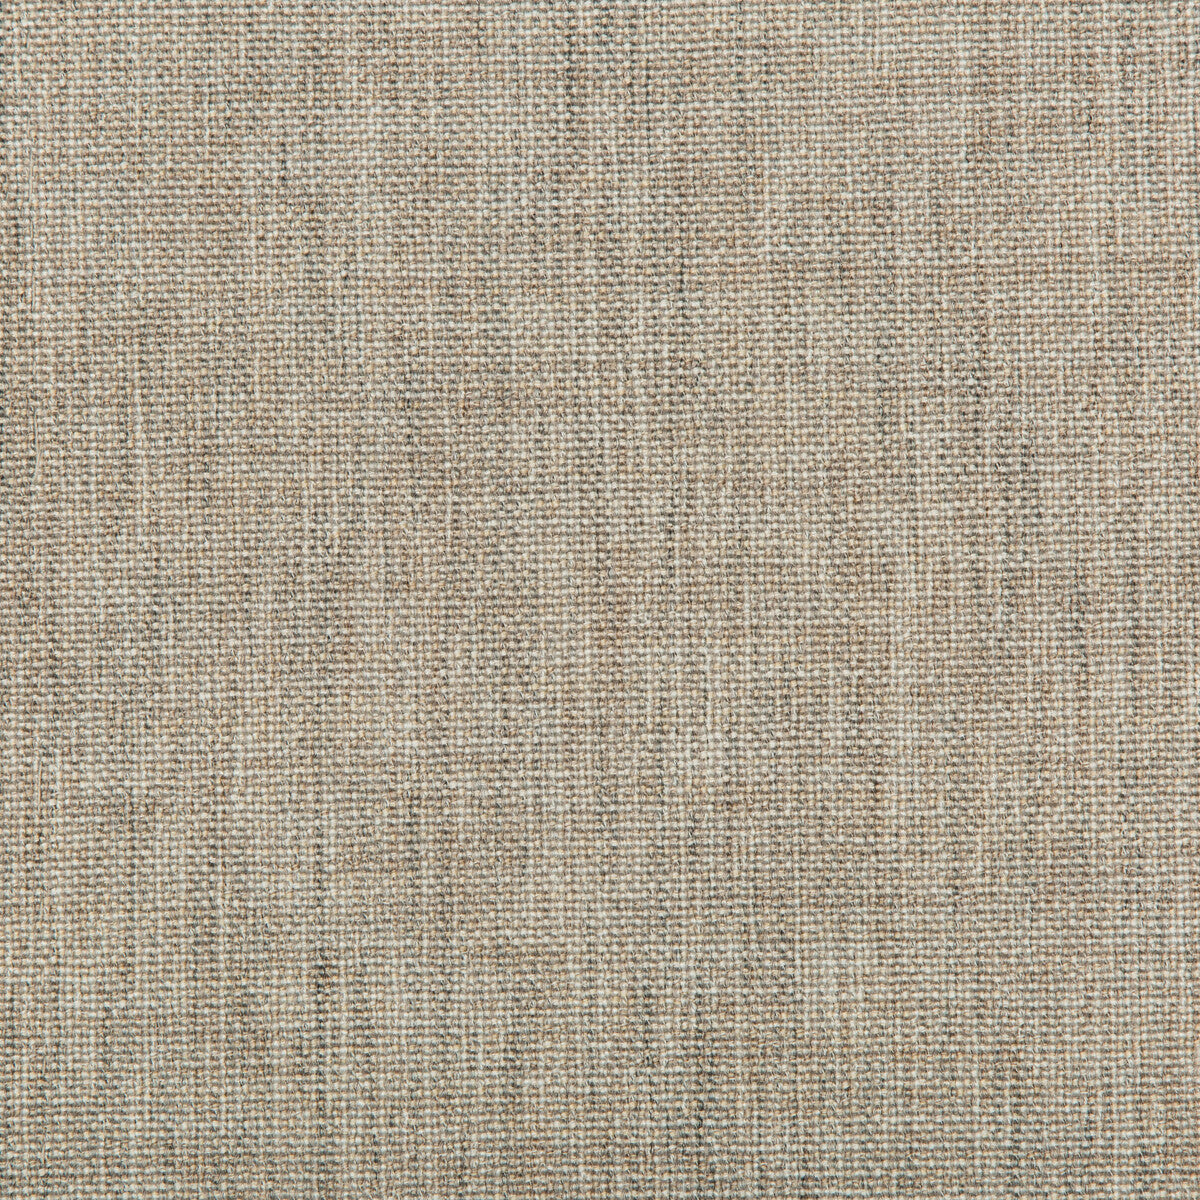 Kravet Couture fabric in 34796-11 color - pattern 34796.11.0 - by Kravet Couture in the Mabley Handler collection